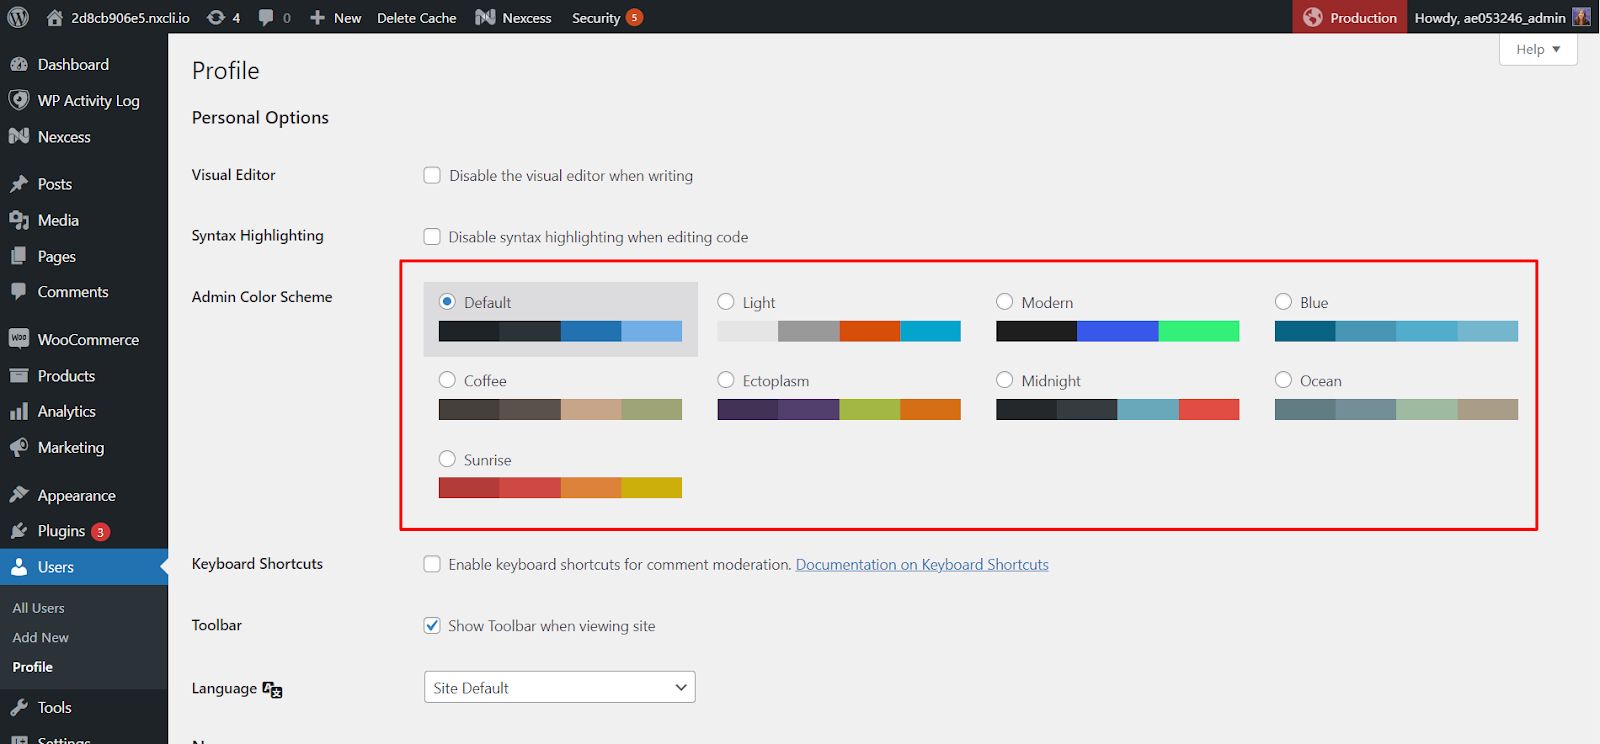 Go to Profile > Personal Options > Admin Color Scheme to customize your WordPress dashboard colors